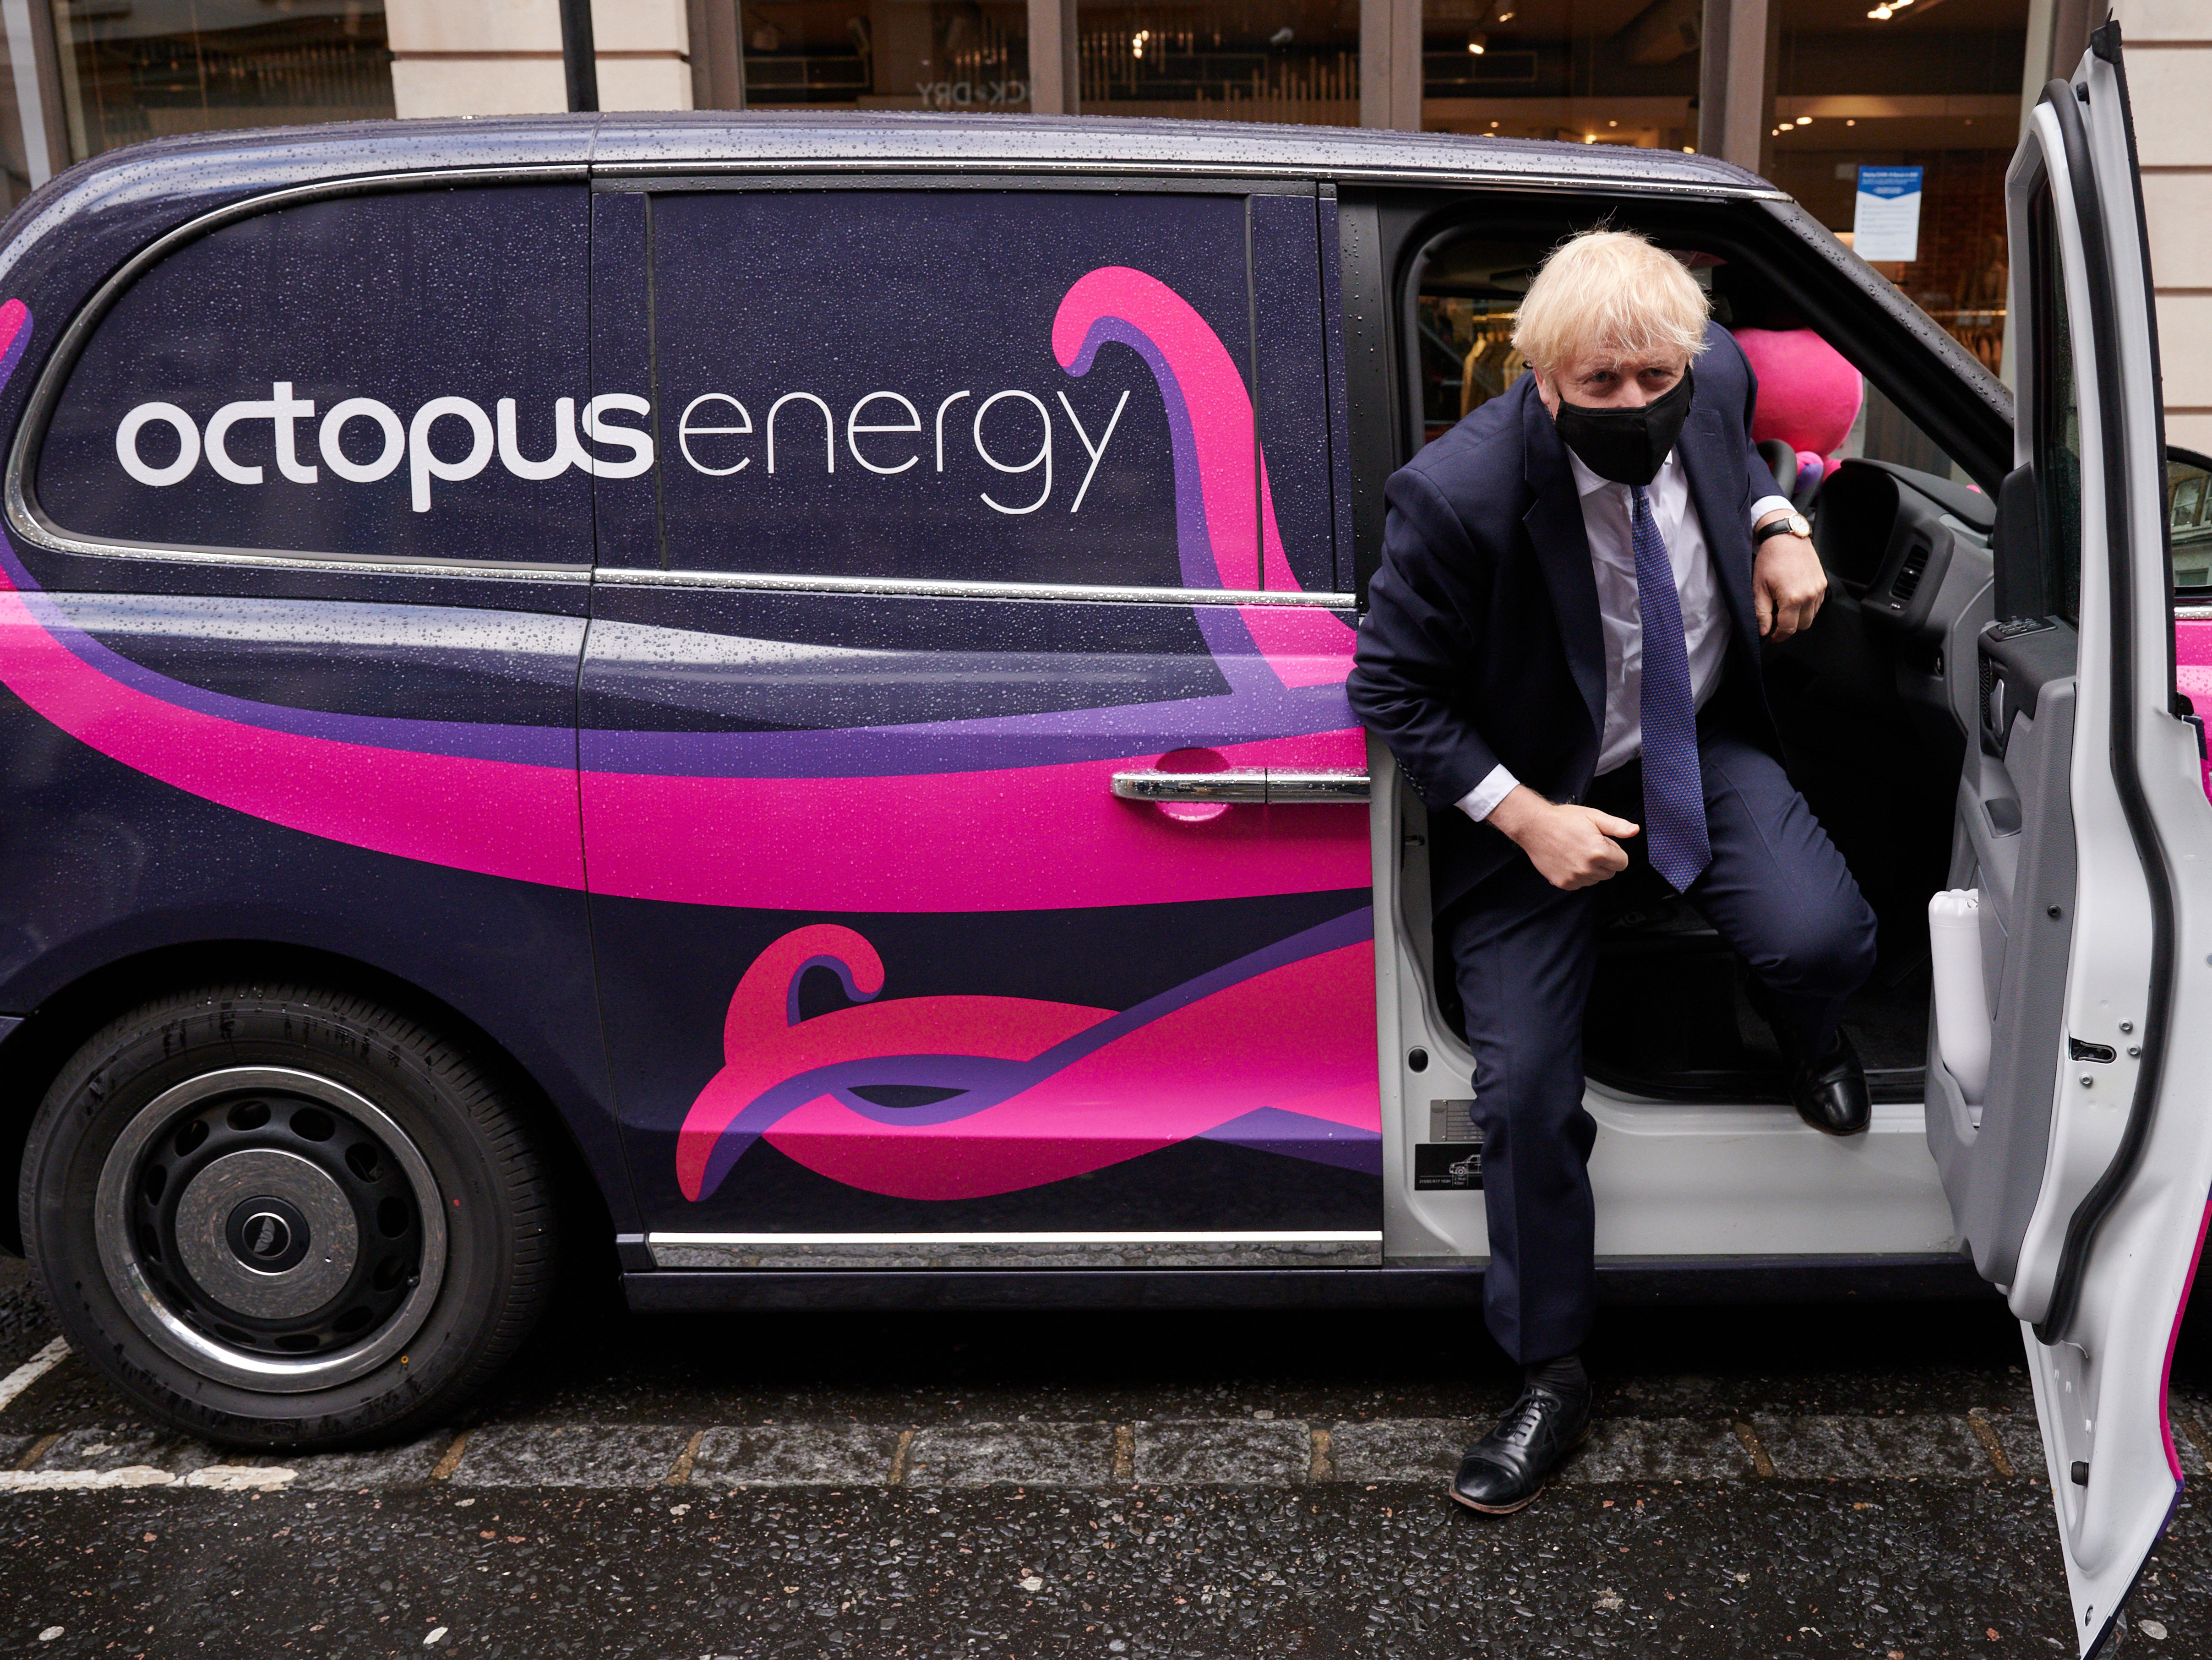 The file photo from October 2020 shows Boris Johnson posing for photographs as he visits the headquarters of Octopus Energy